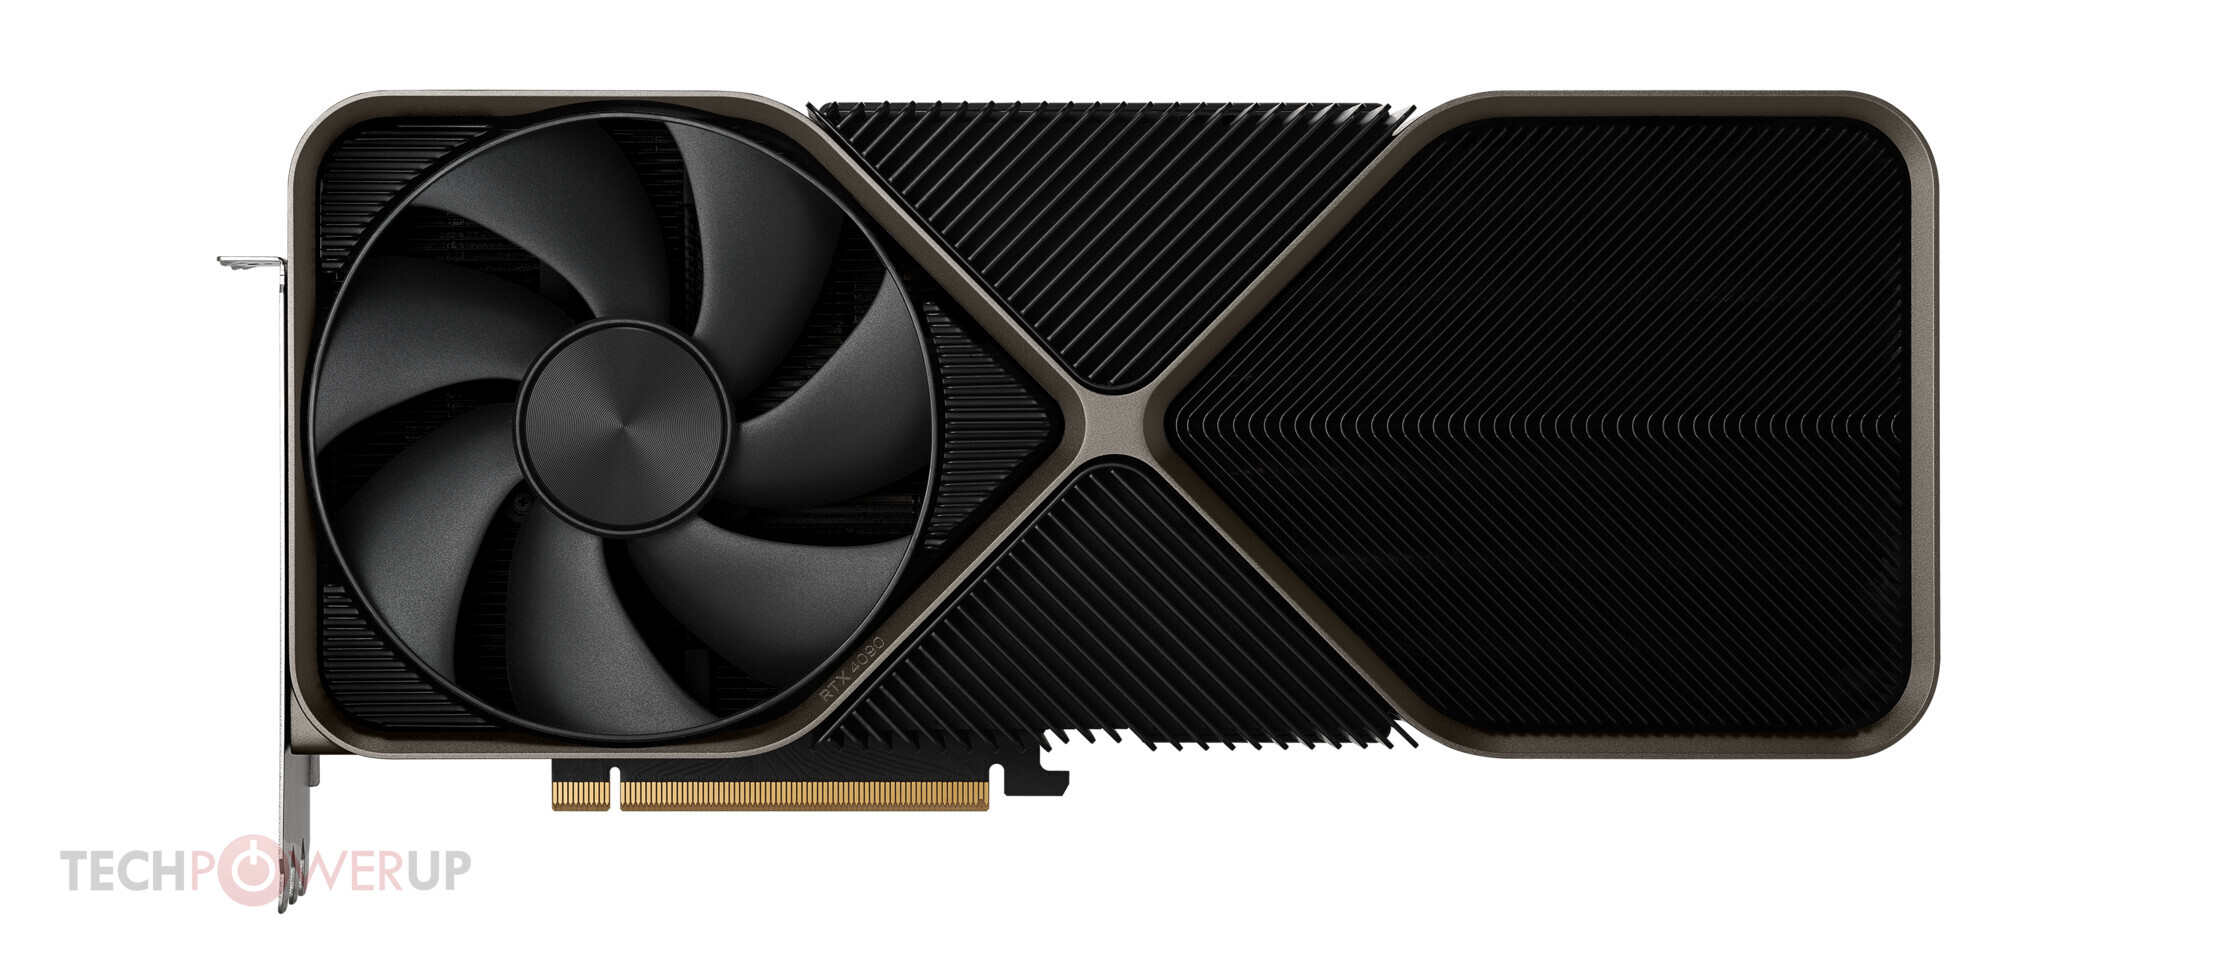 GeForce RTX 4090 Leaves Plenty of Room for a Future RTX 4090 Ti Flagship